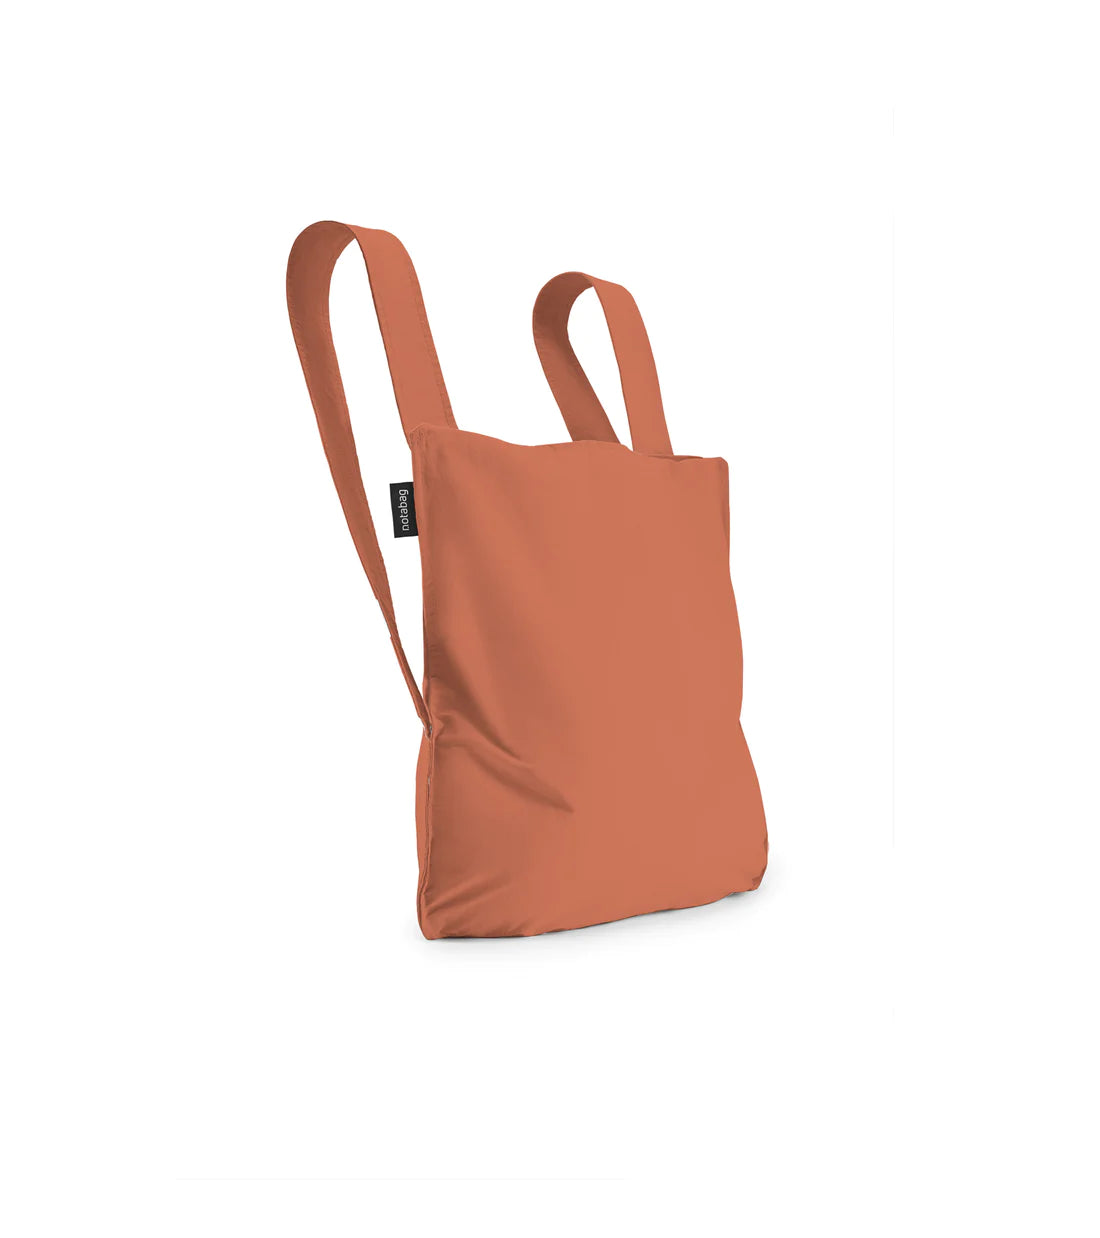 Notabag Foldable reusable backpack/tote in terracotta unfolded to backpack